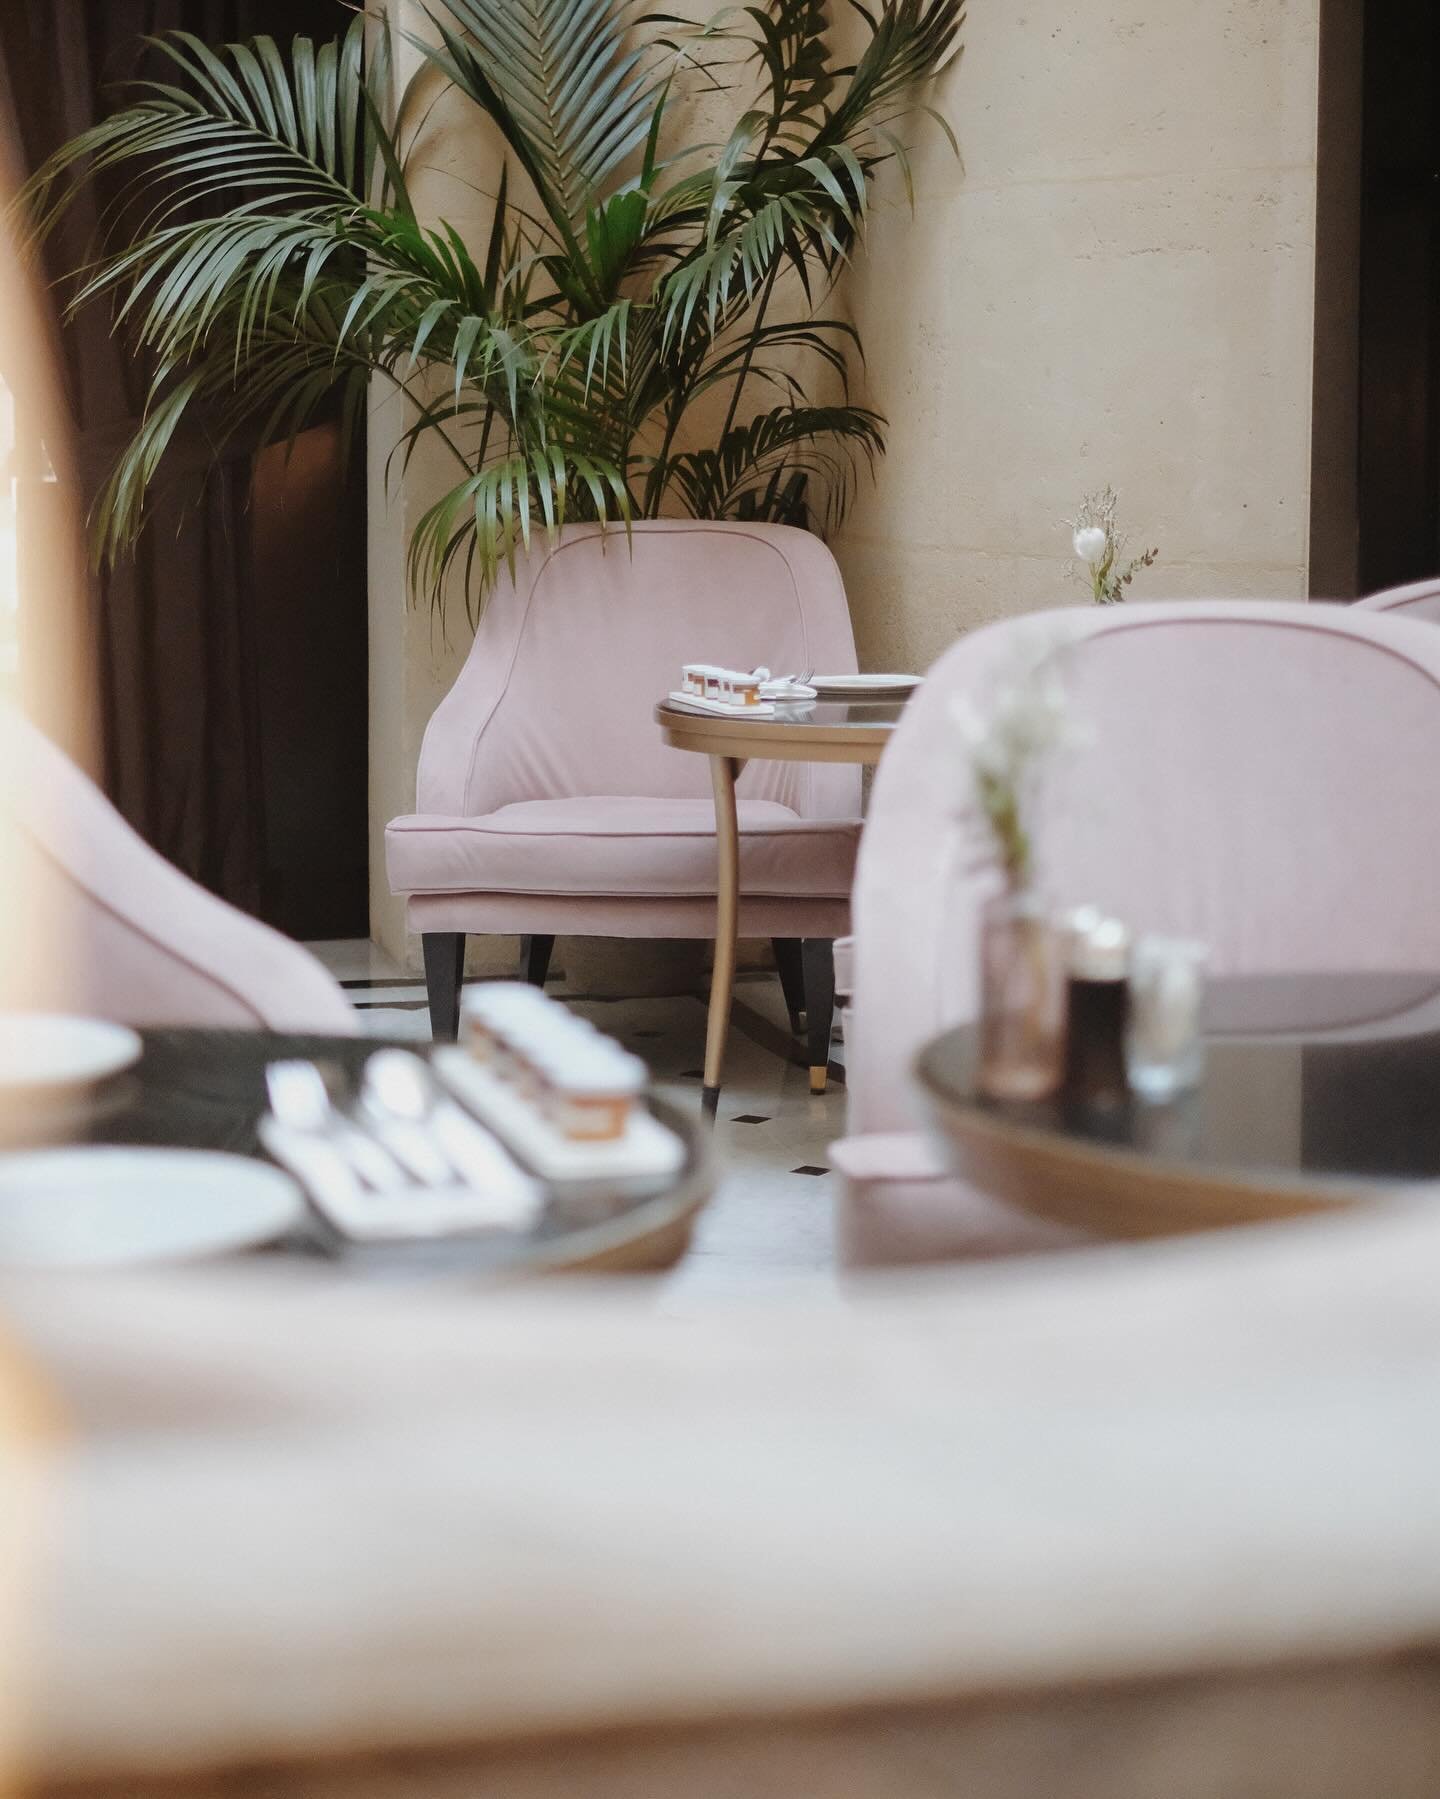 (ad / I stayed at @lenarcisseblanc while on assignment for @smallluxuryhotels) Details from @lenarcisseblanc&rsquo;s  restaurant, surrounded by pops of pastel pink and leafy greens. Just a stone&rsquo;s throw from the Eiffel Tower and the Seine. Not 